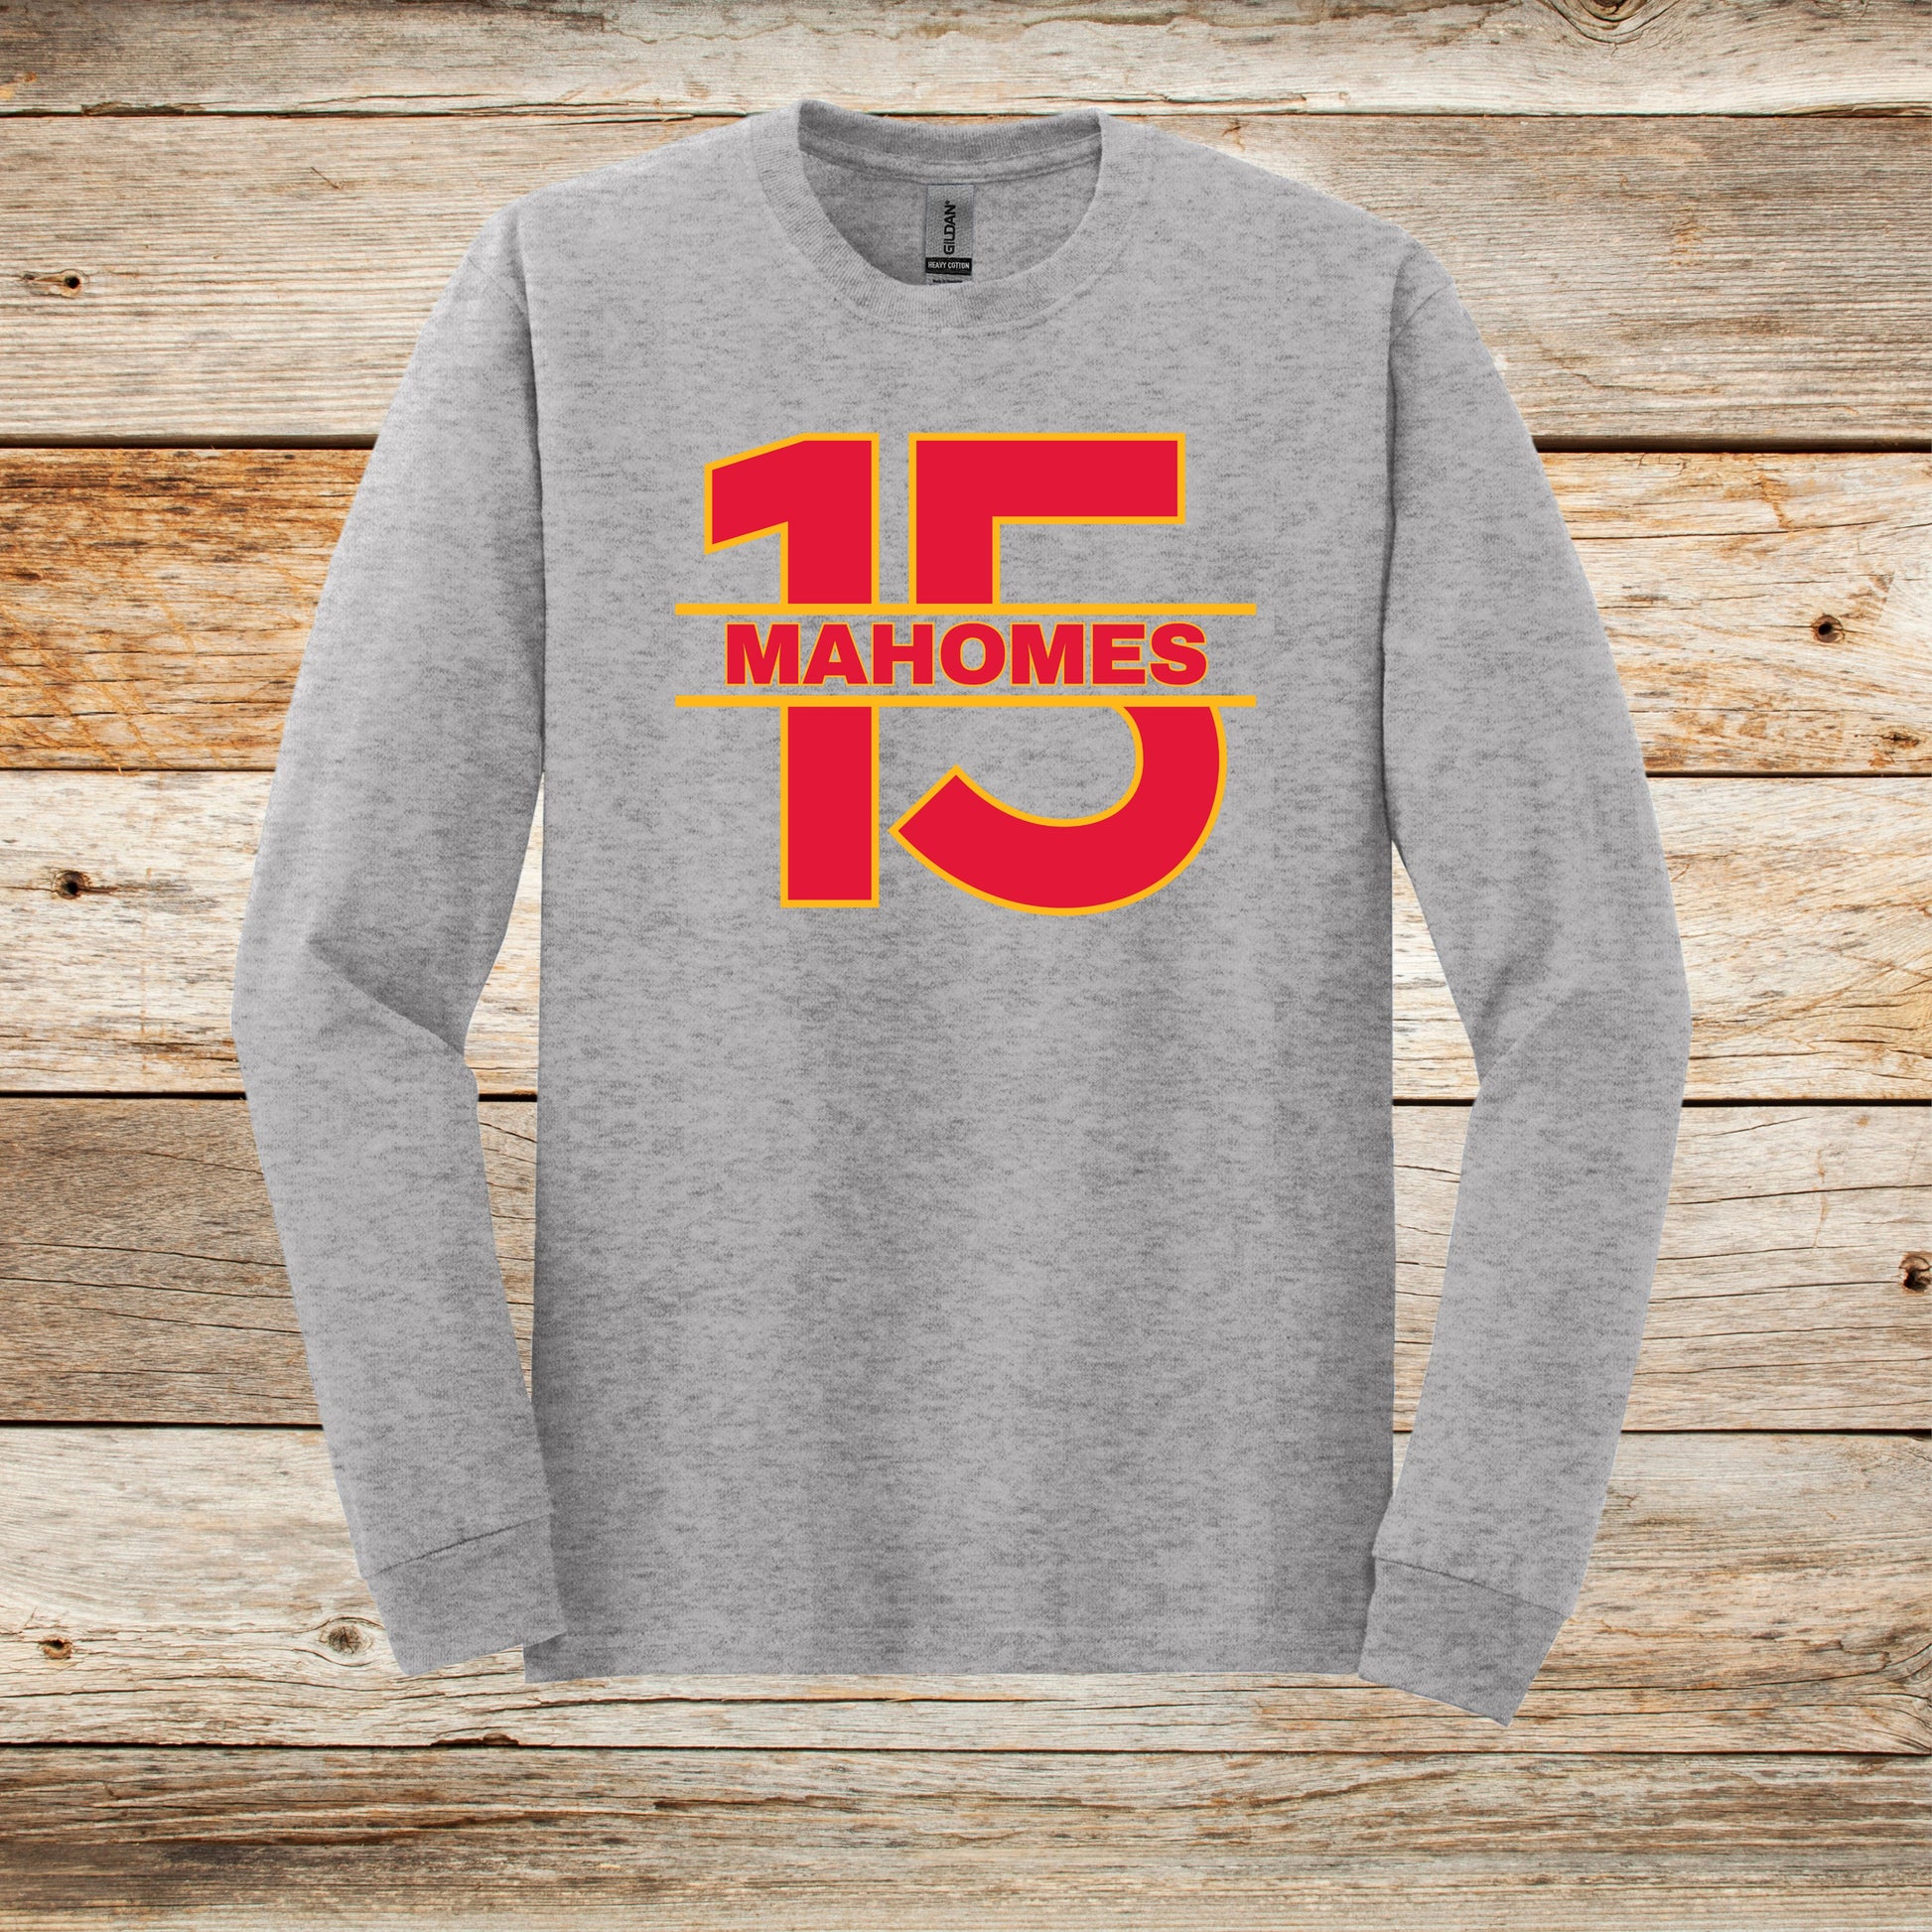 Football Long Sleeve T-Shirt - Chiefs Football - 15 Mahomes - Adult and Children's Tee Shirts - Sports Long Sleeve T-Shirts Graphic Avenue Sport Grey Adult Small 